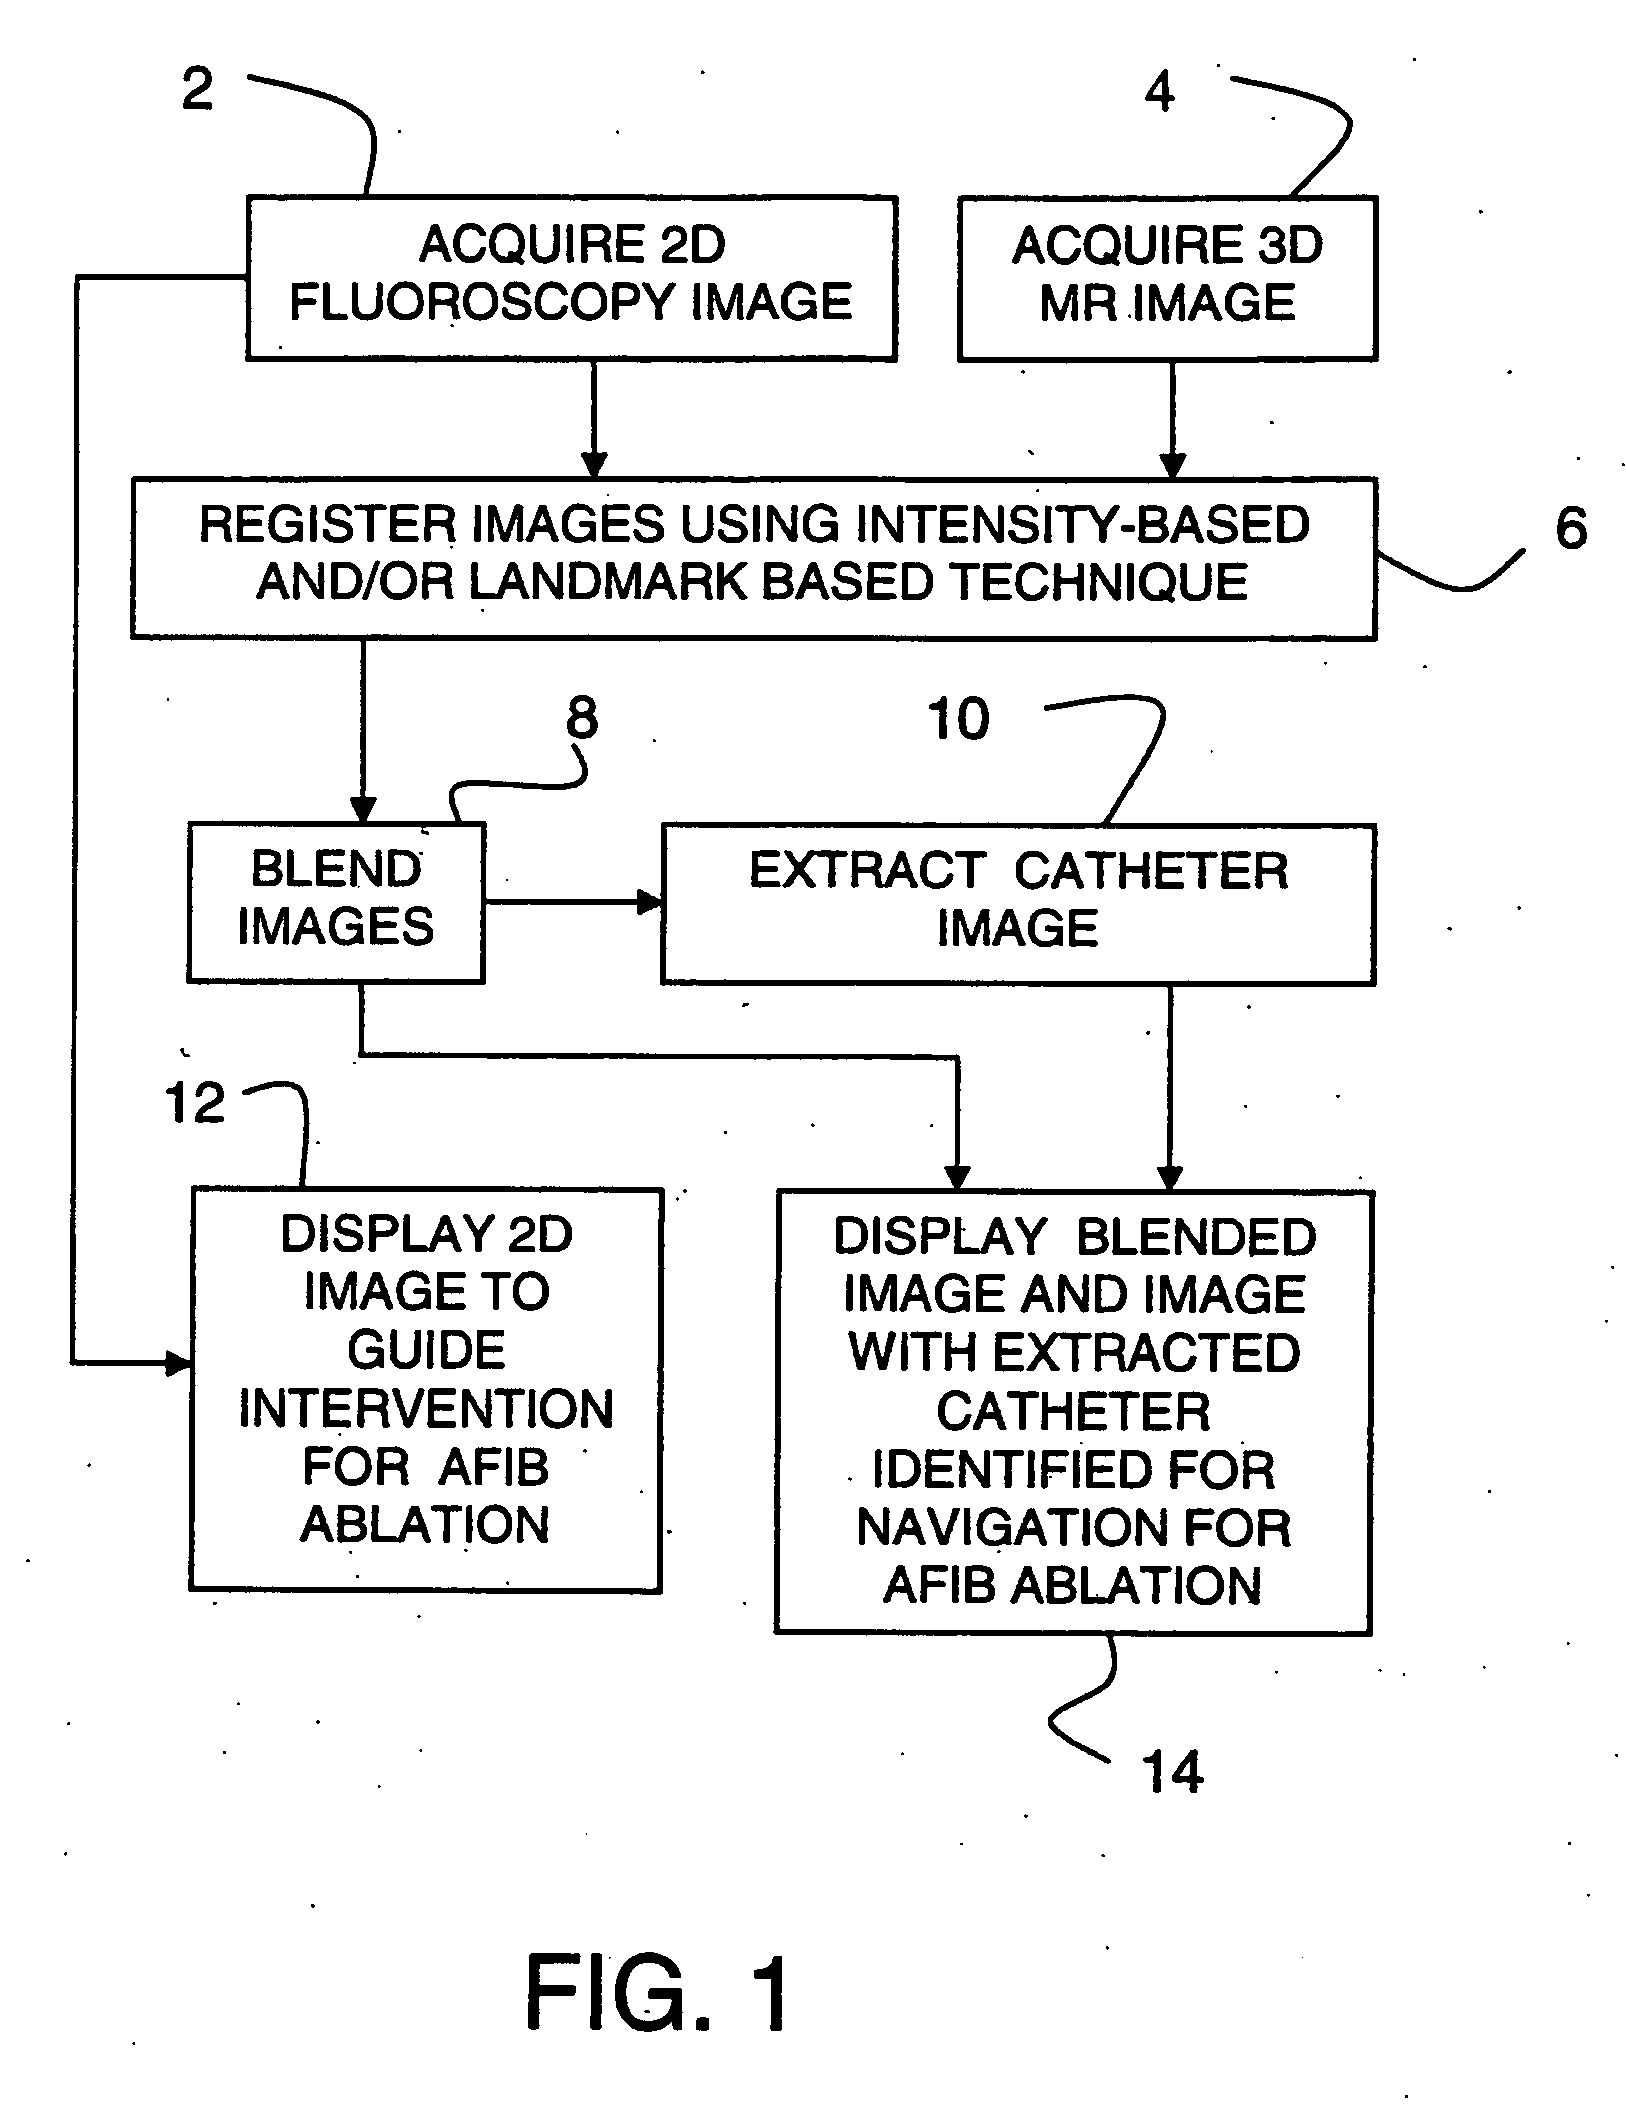 Method and system for cardiac imaging and catheter guidance for radio frequency (RF) ablation